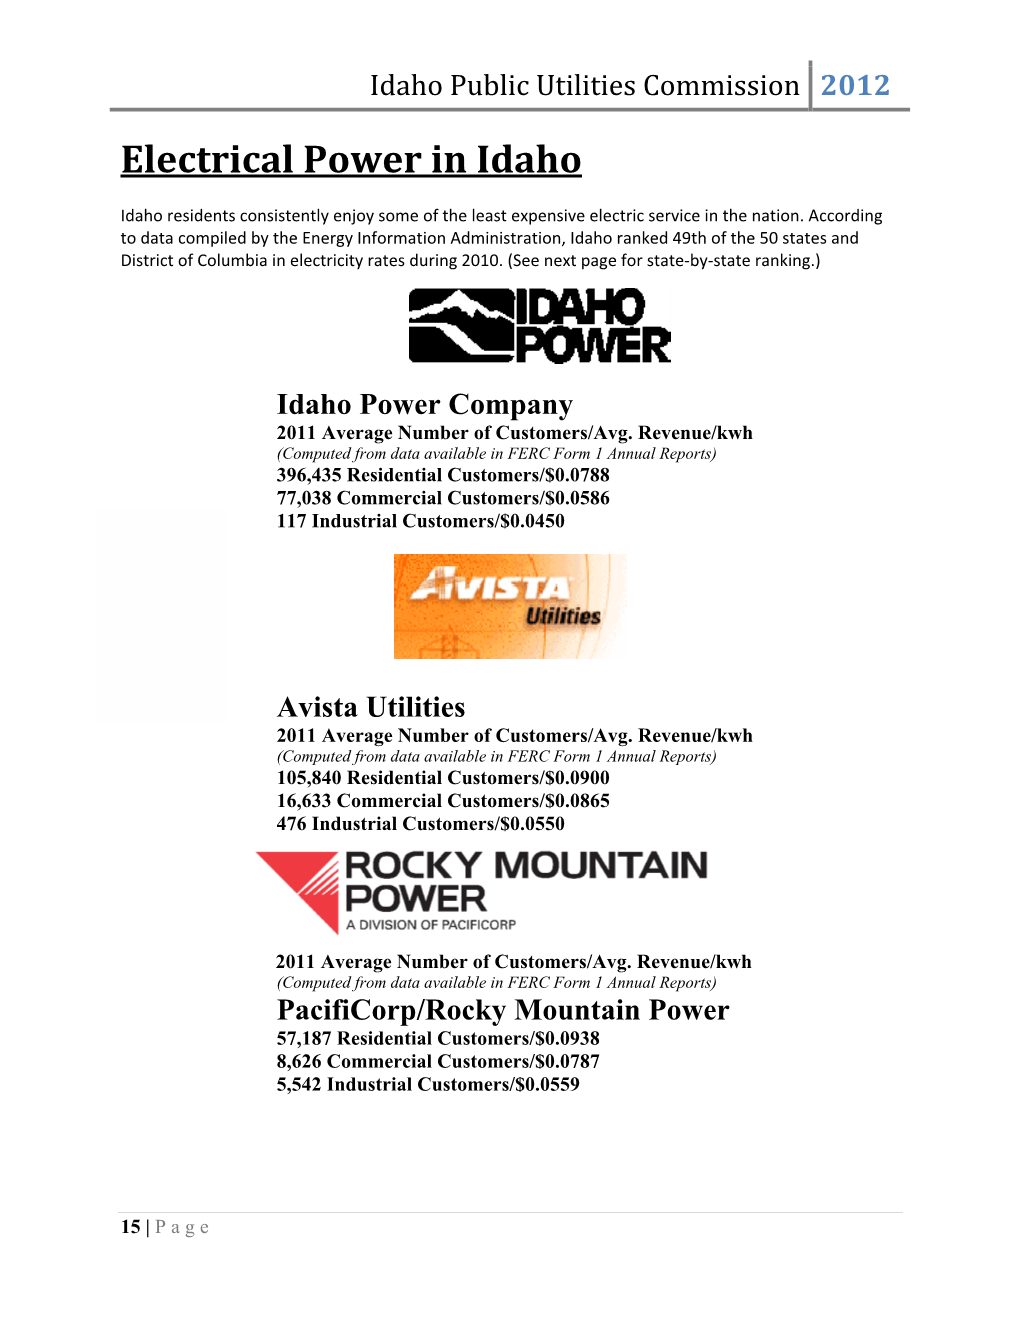 Electrical Power in Idaho